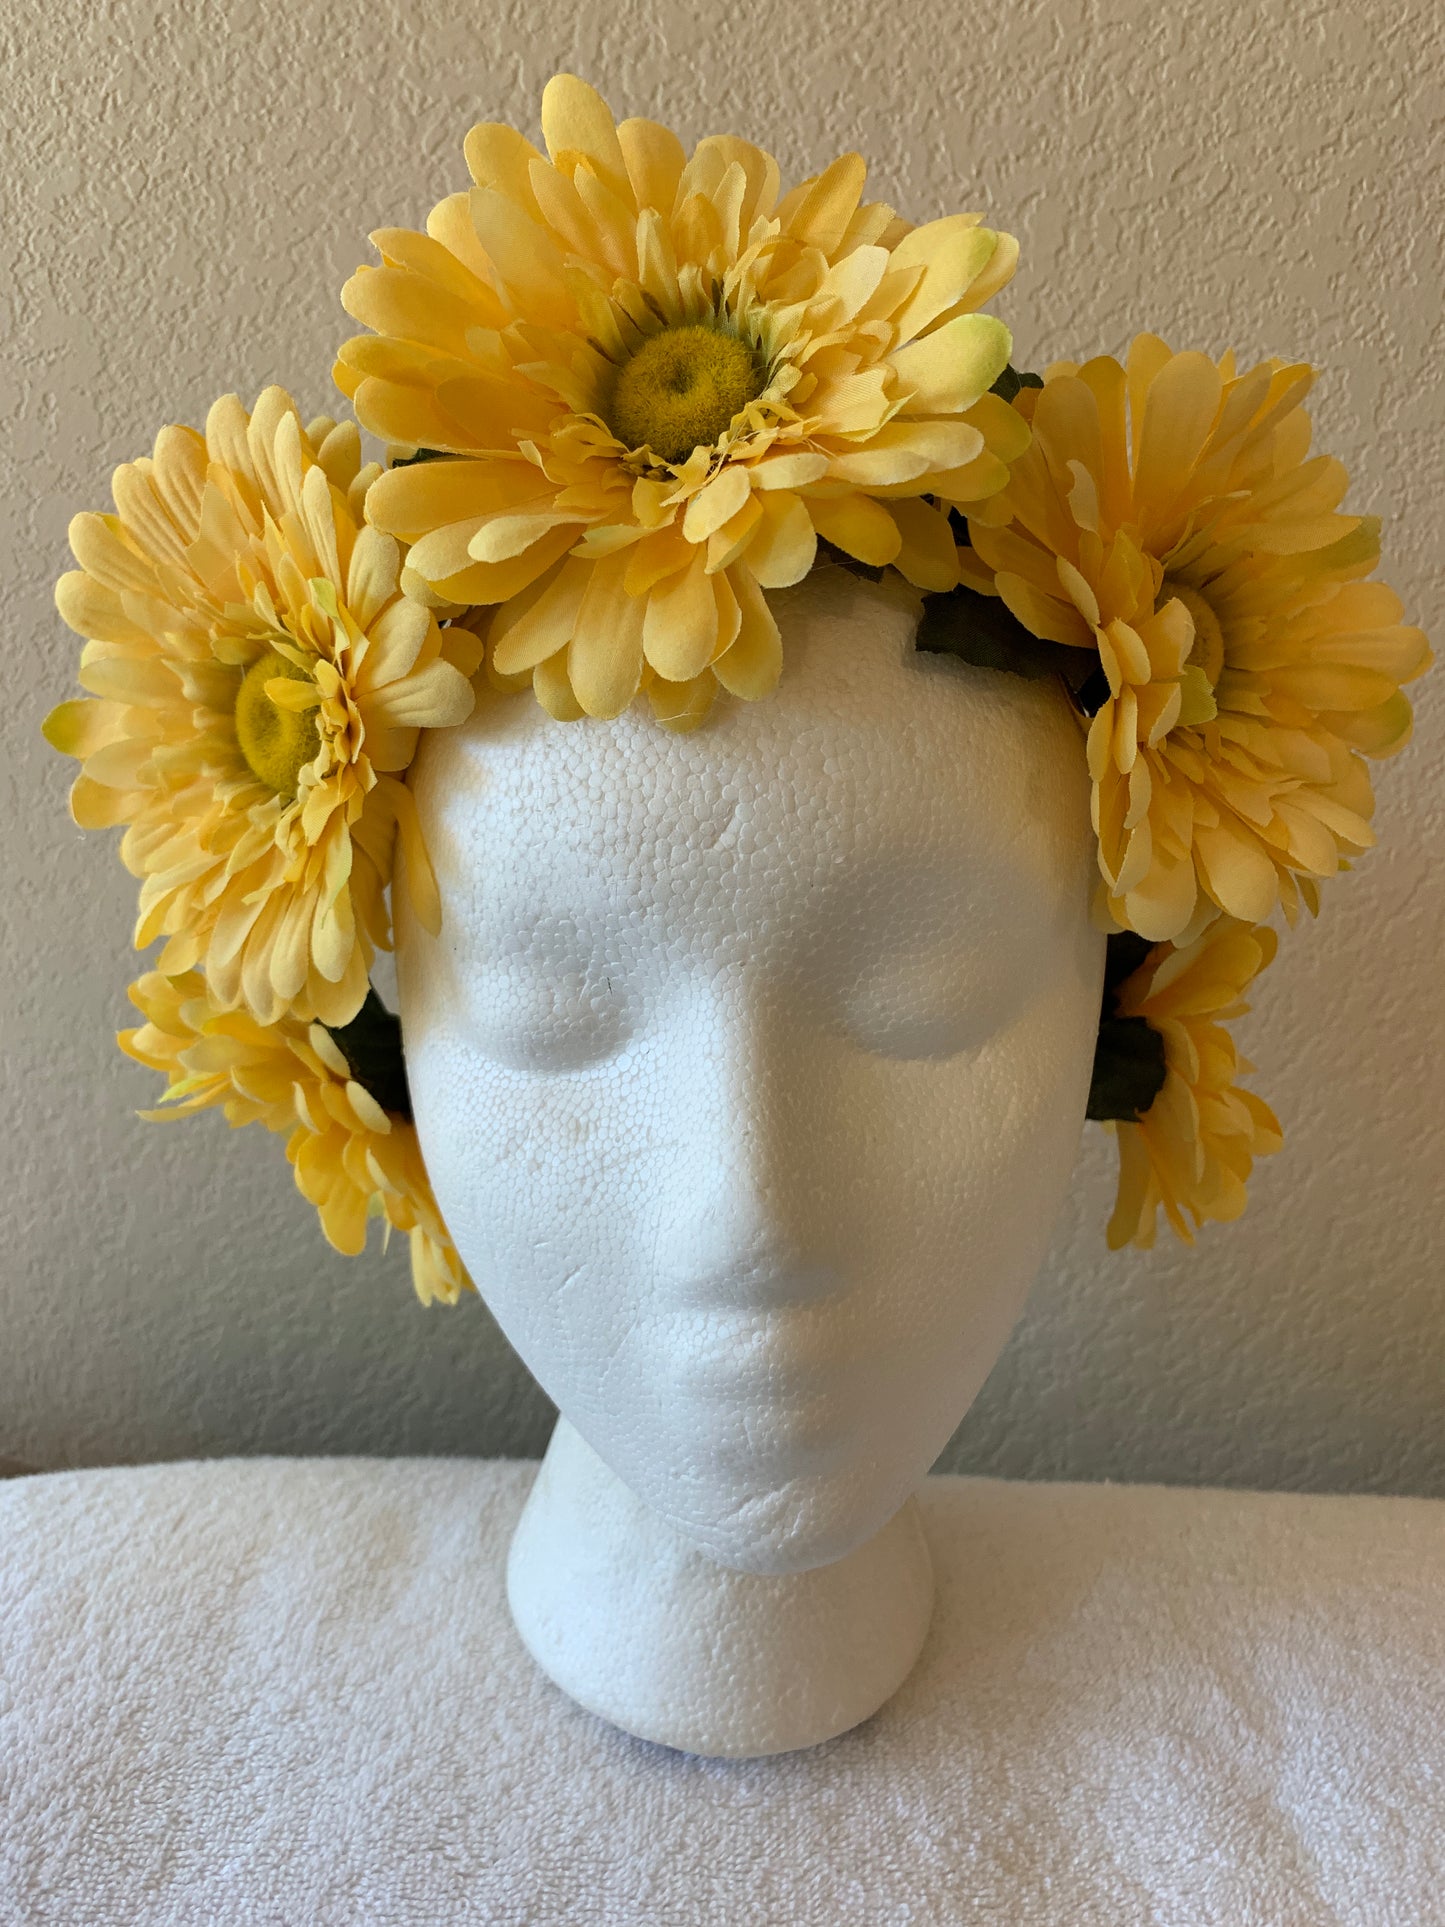 Large Wreath - All Yellow Daisies